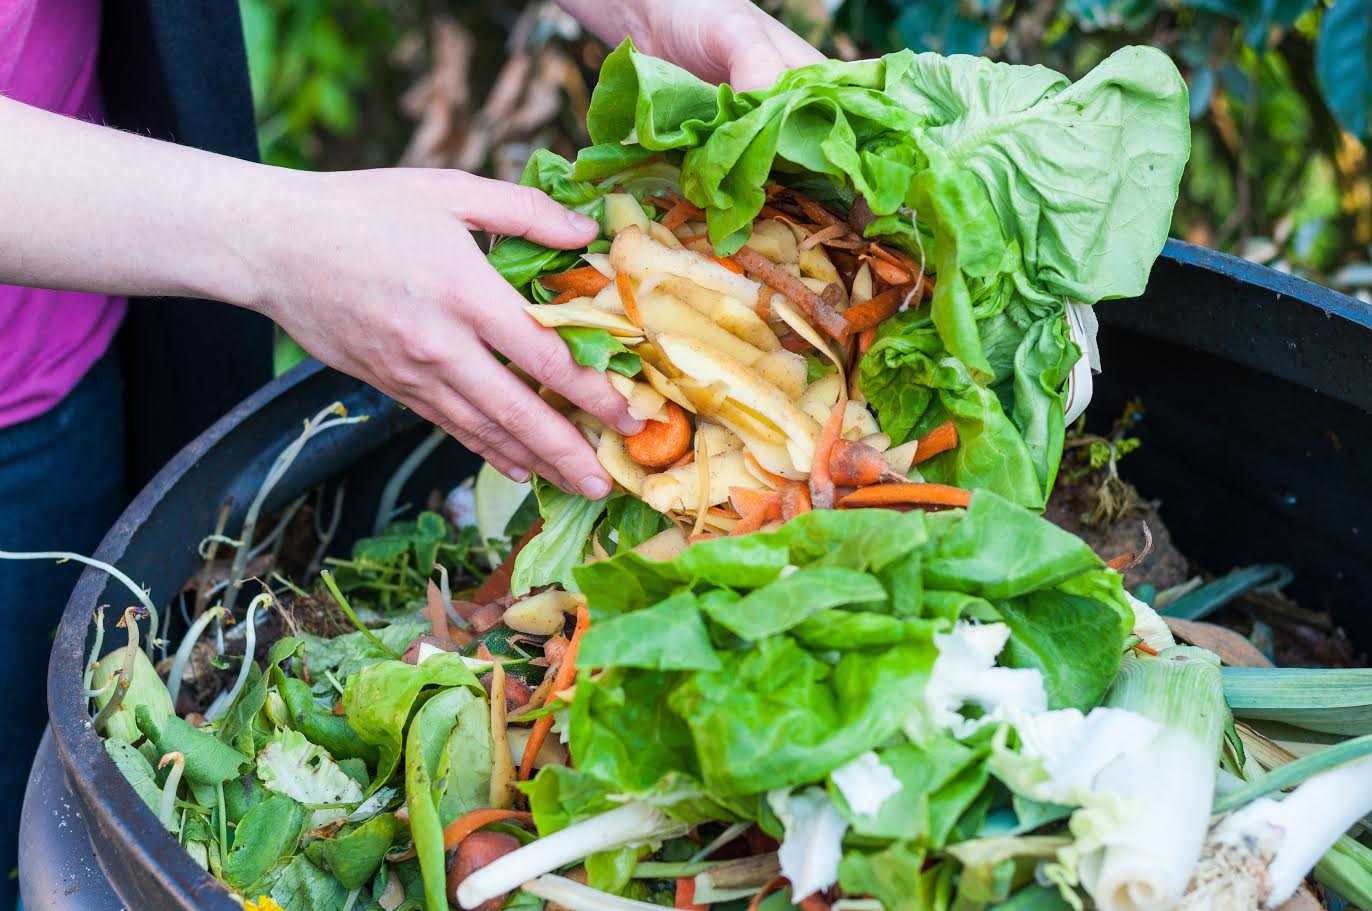 11 simple ways to recycle kitchen organic waste